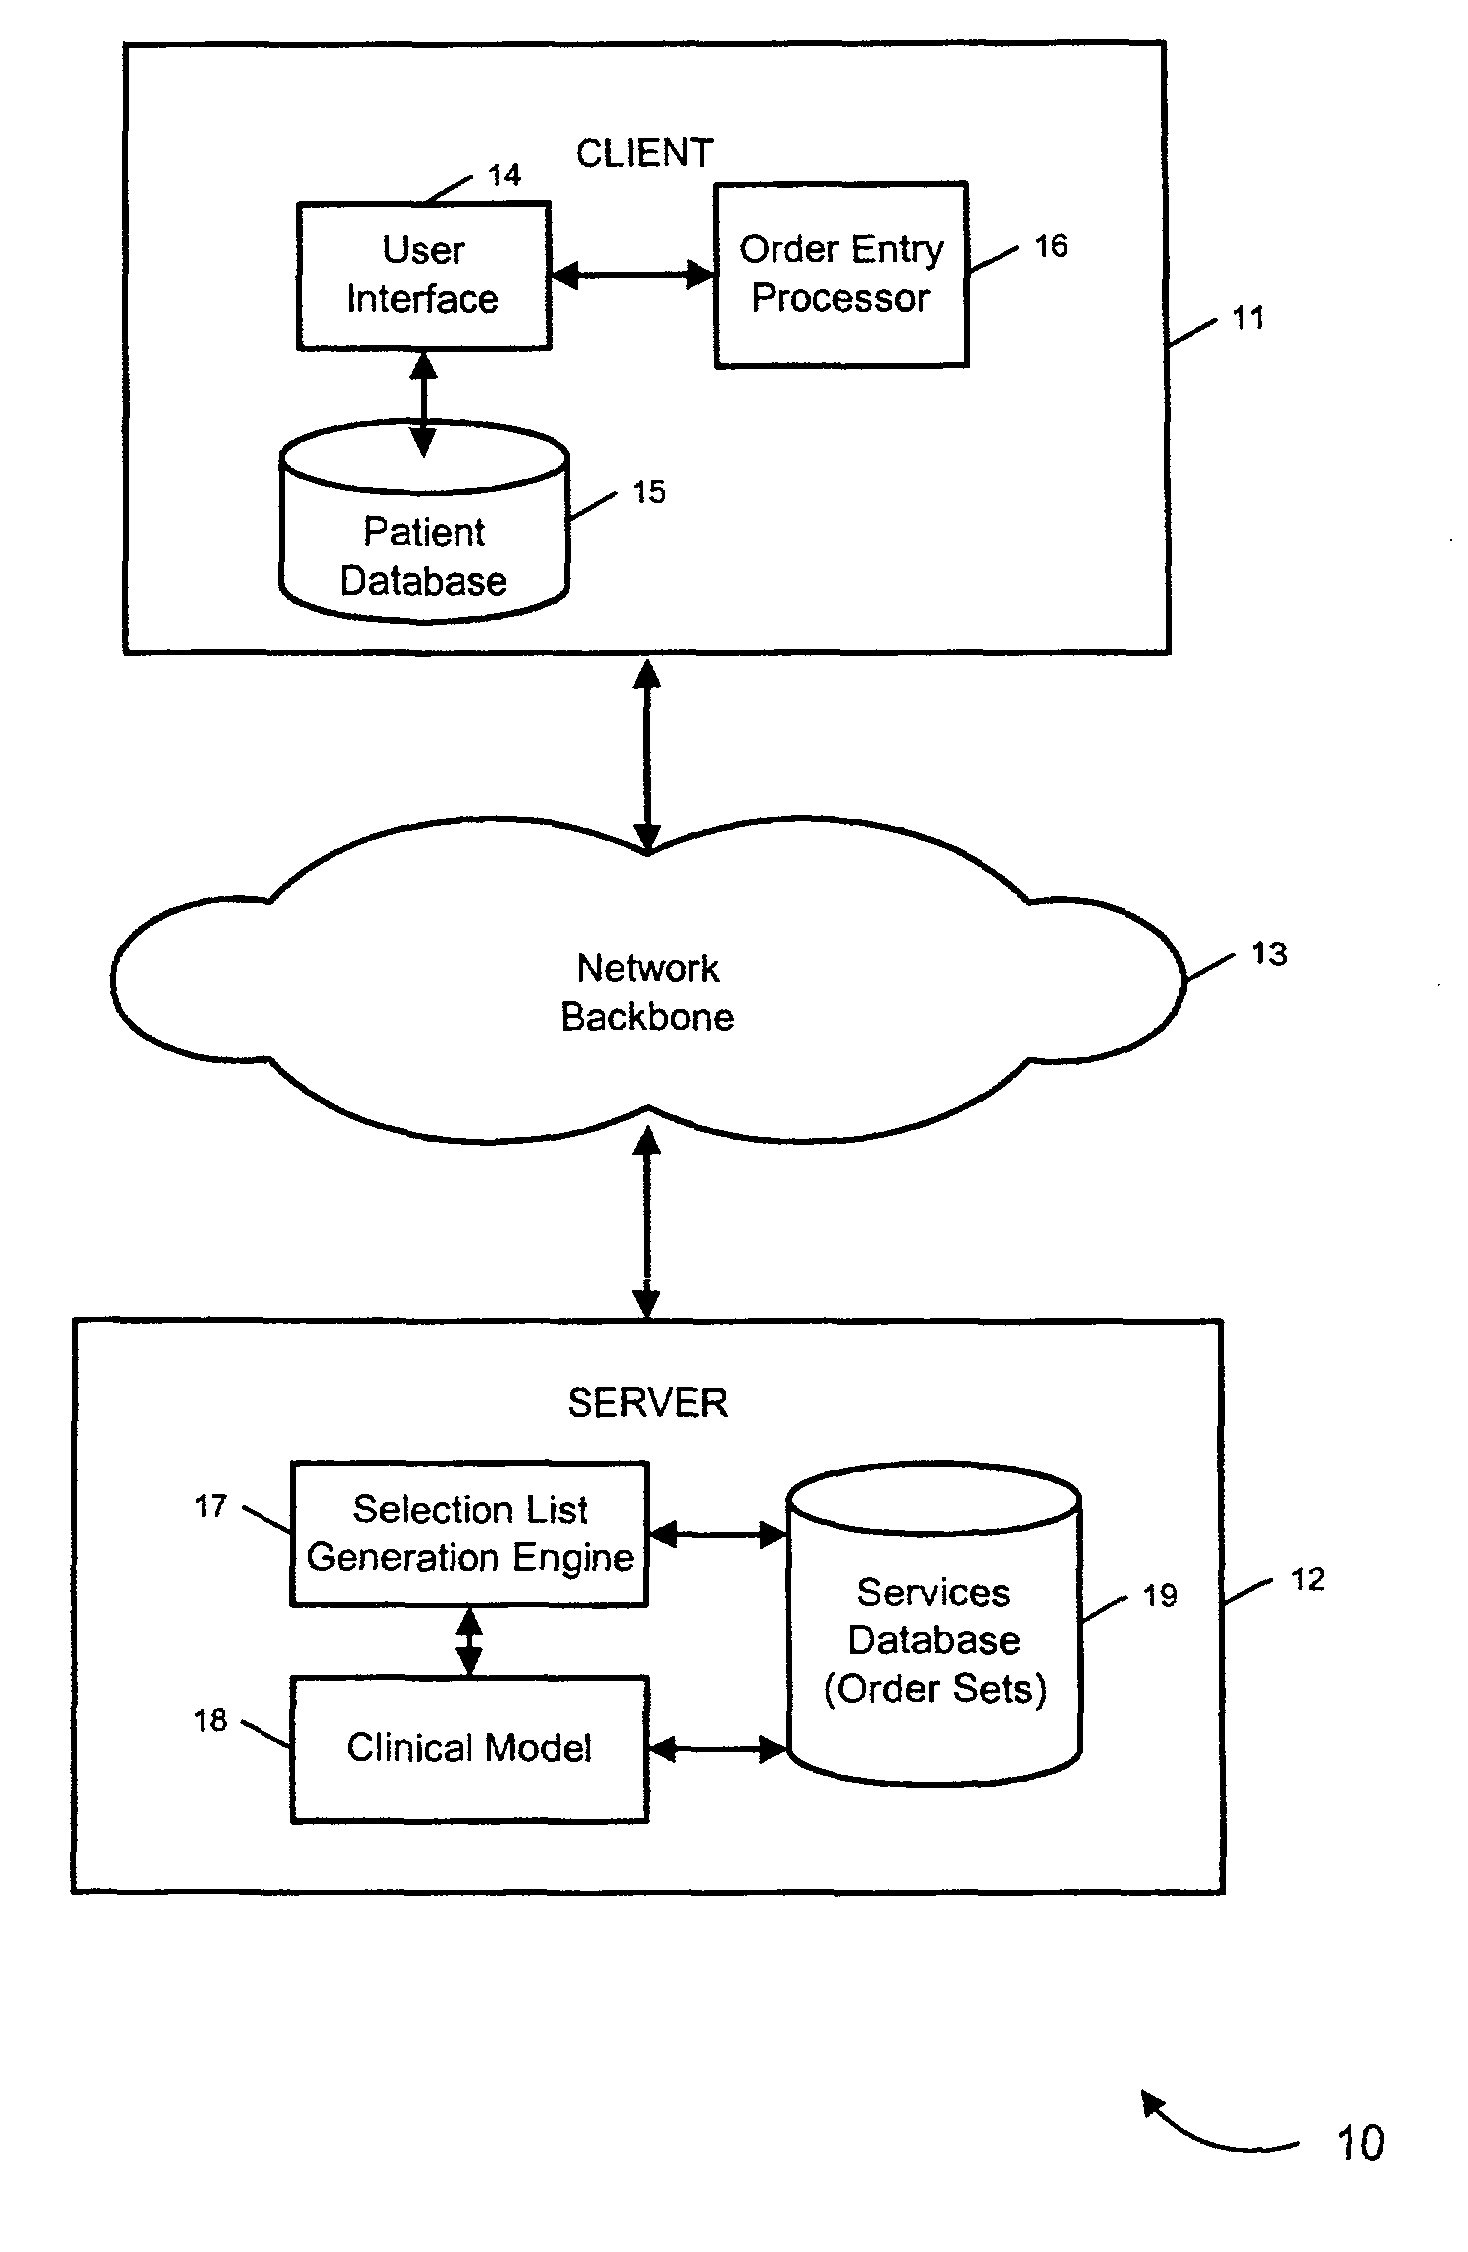 System and method for ordering patient specific healthcare services